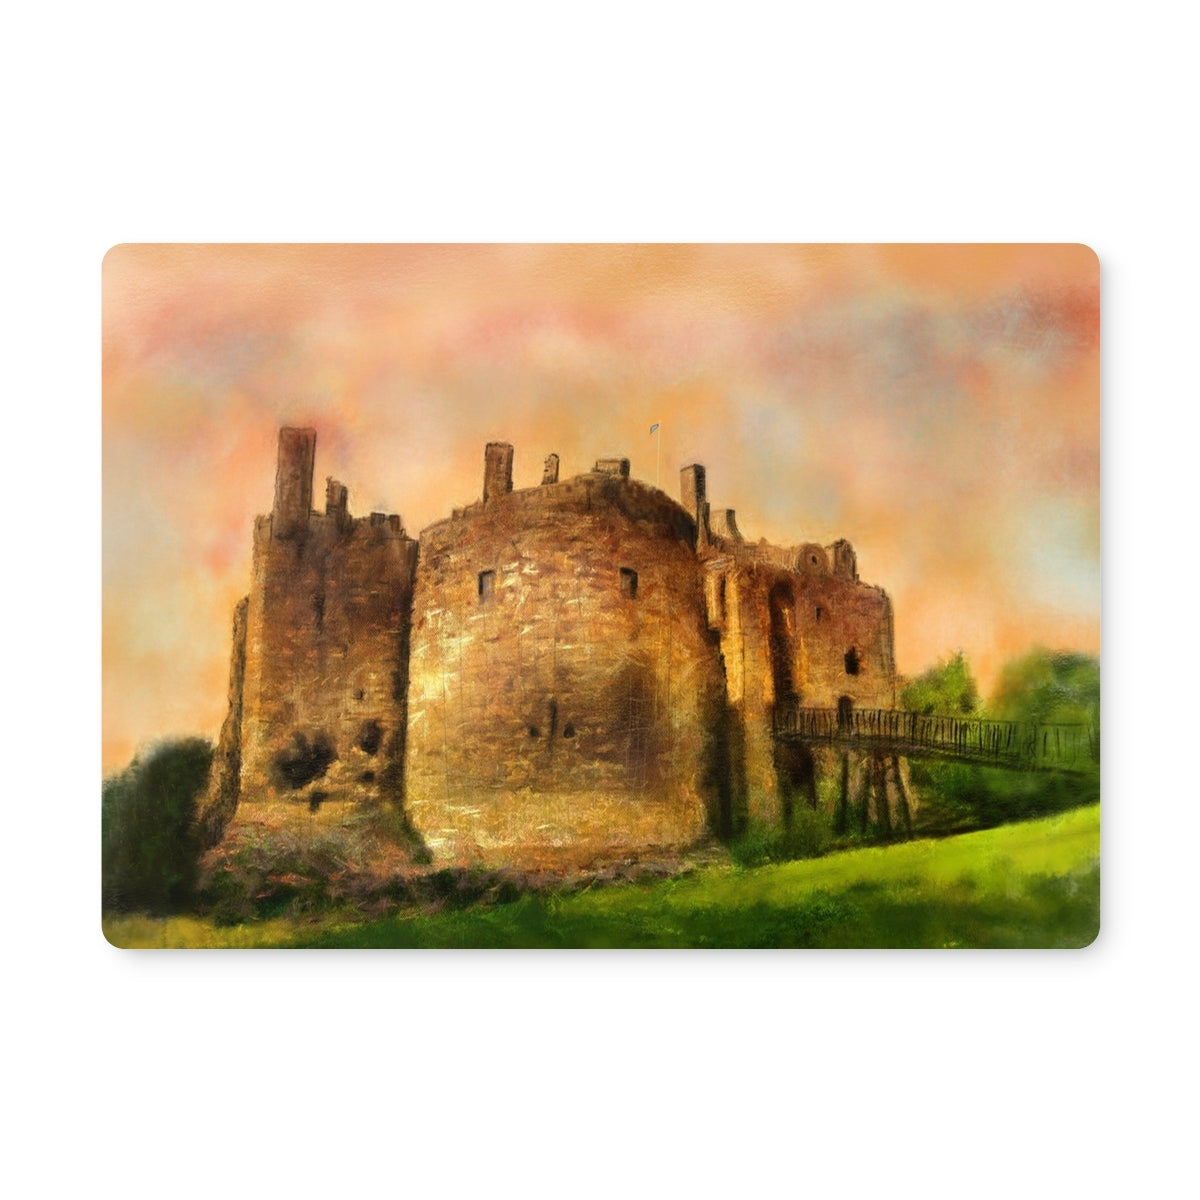 Dirleton Castle Art Gifts Placemat-Homeware-Prodigi-Single Placemat-Paintings, Prints, Homeware, Art Gifts From Scotland By Scottish Artist Kevin Hunter